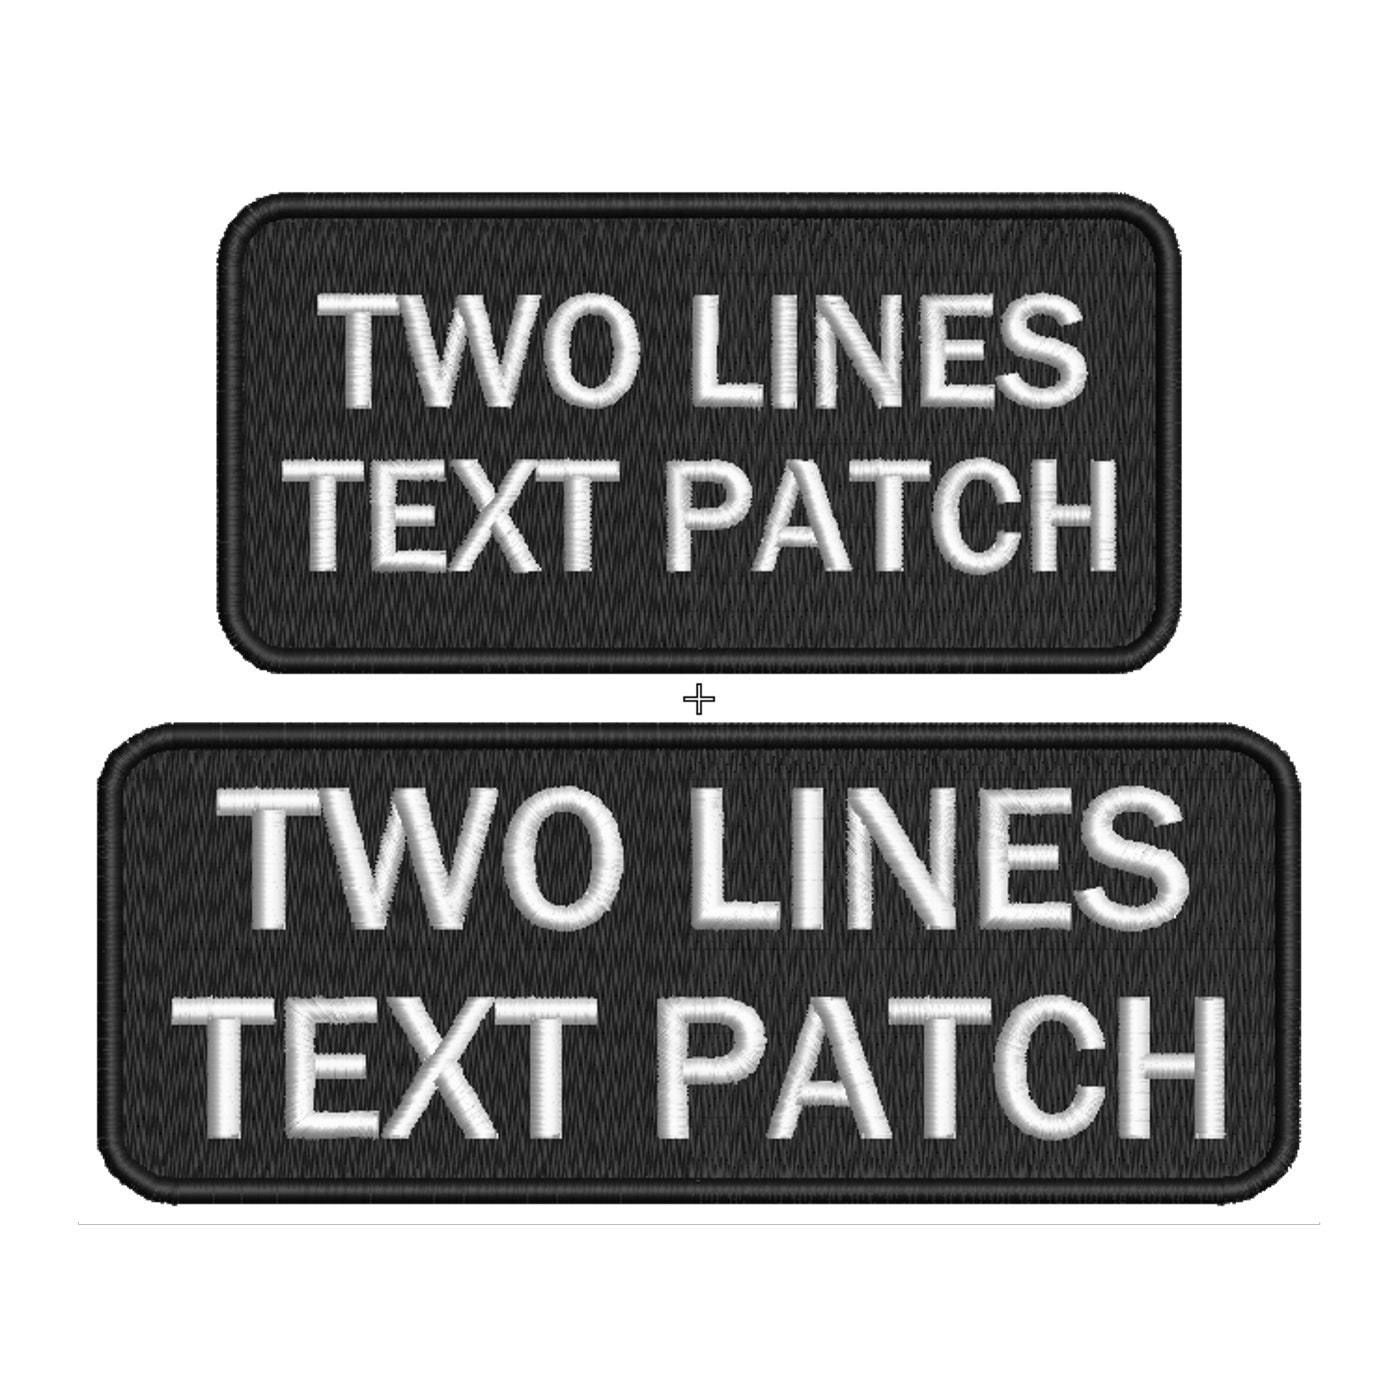 Customizable - Up To 4 Lines Of Text - Black - Removable Patch